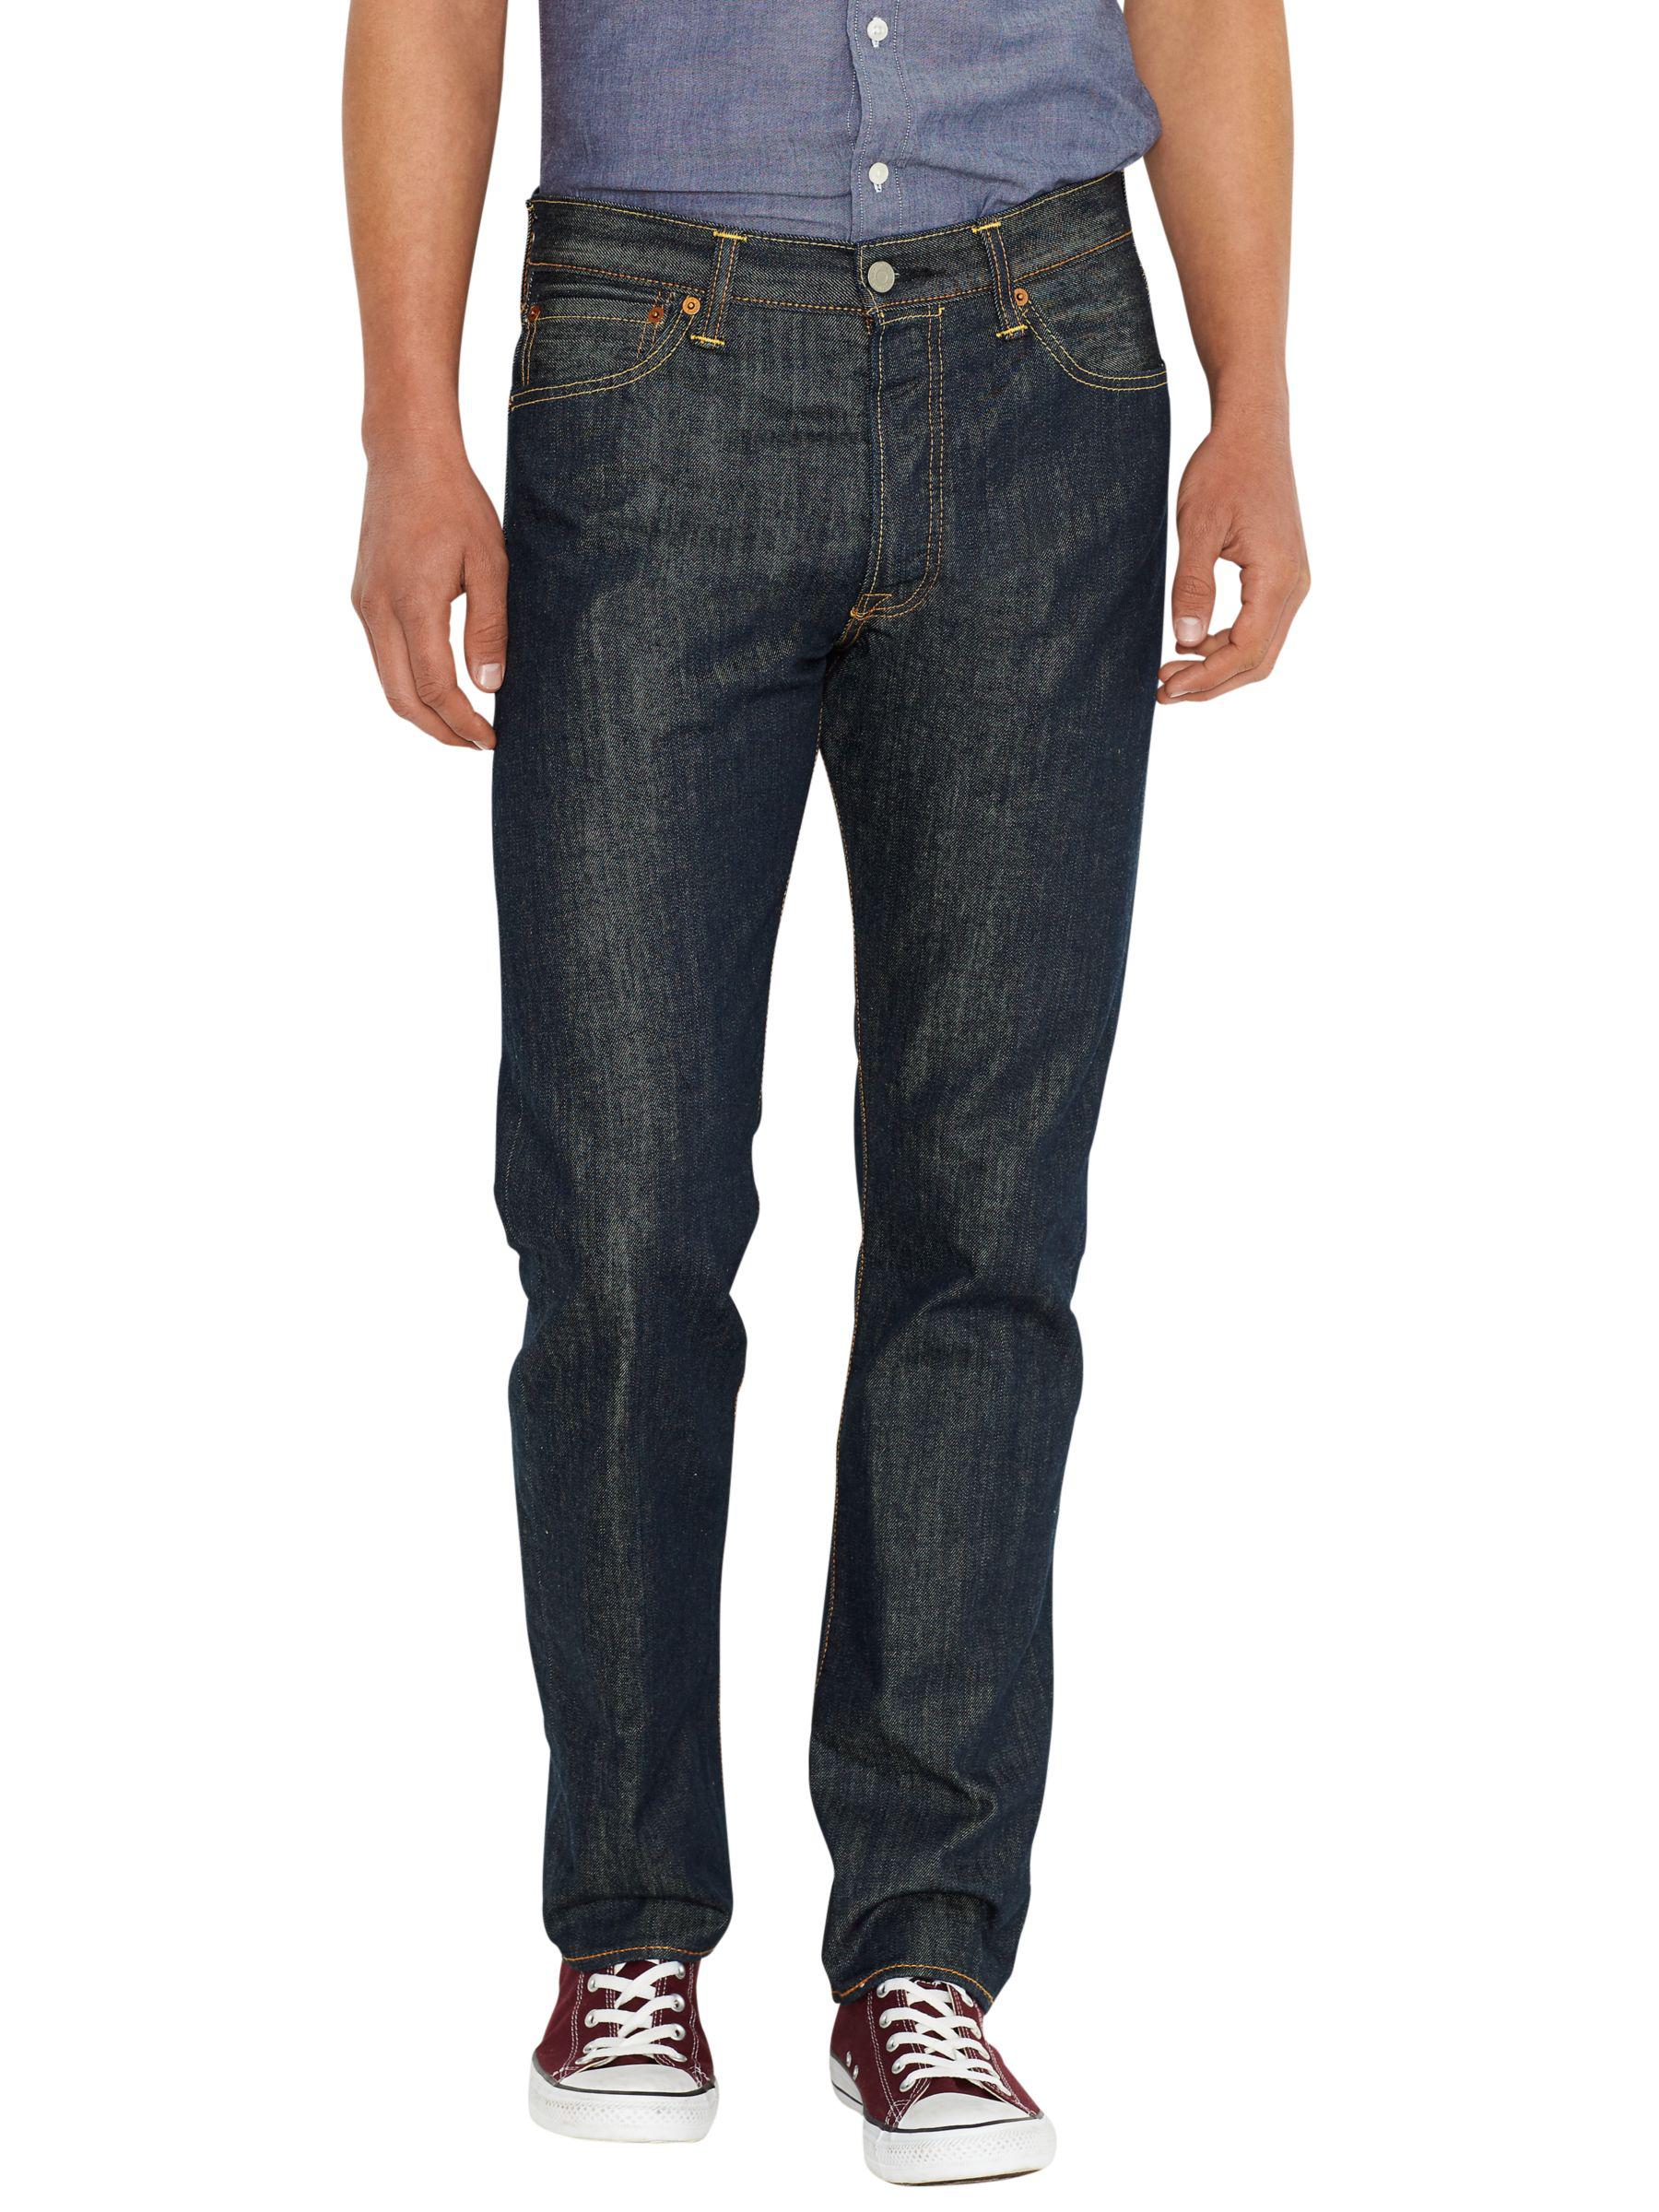 Levi's 501 Original Straight Jeans in Blue for Men - Save 20% - Lyst